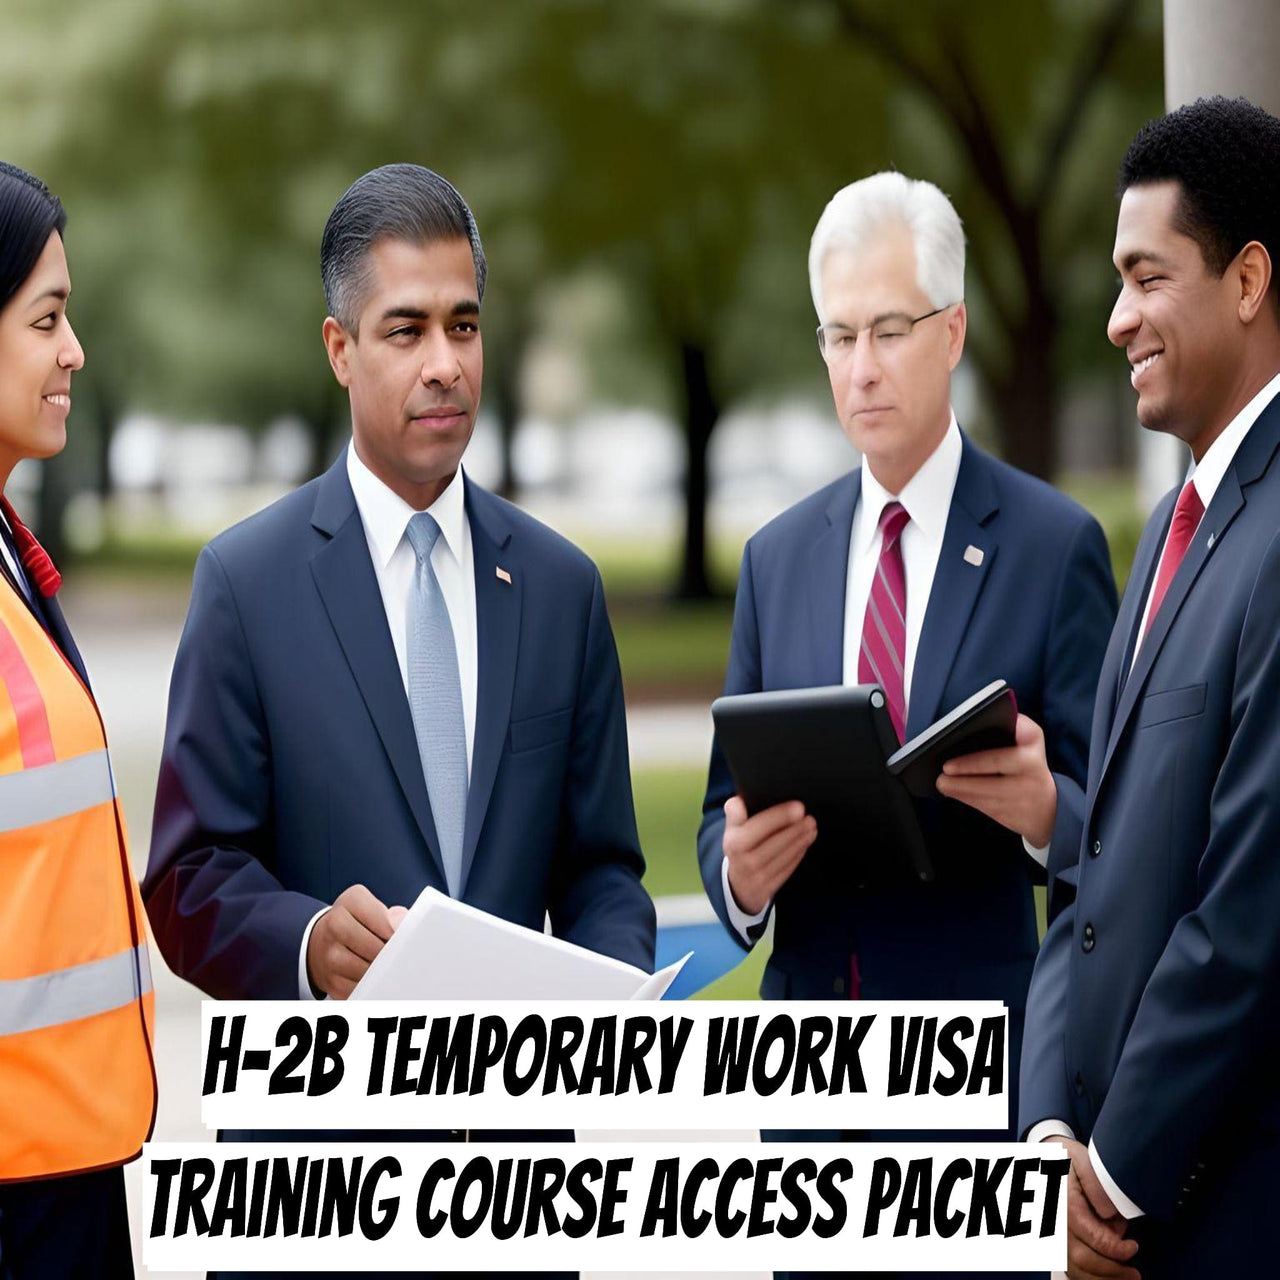 Rocket Immigration Petitions Immigration Visa H-2B Temporary Work Visa Training Course Access Packet